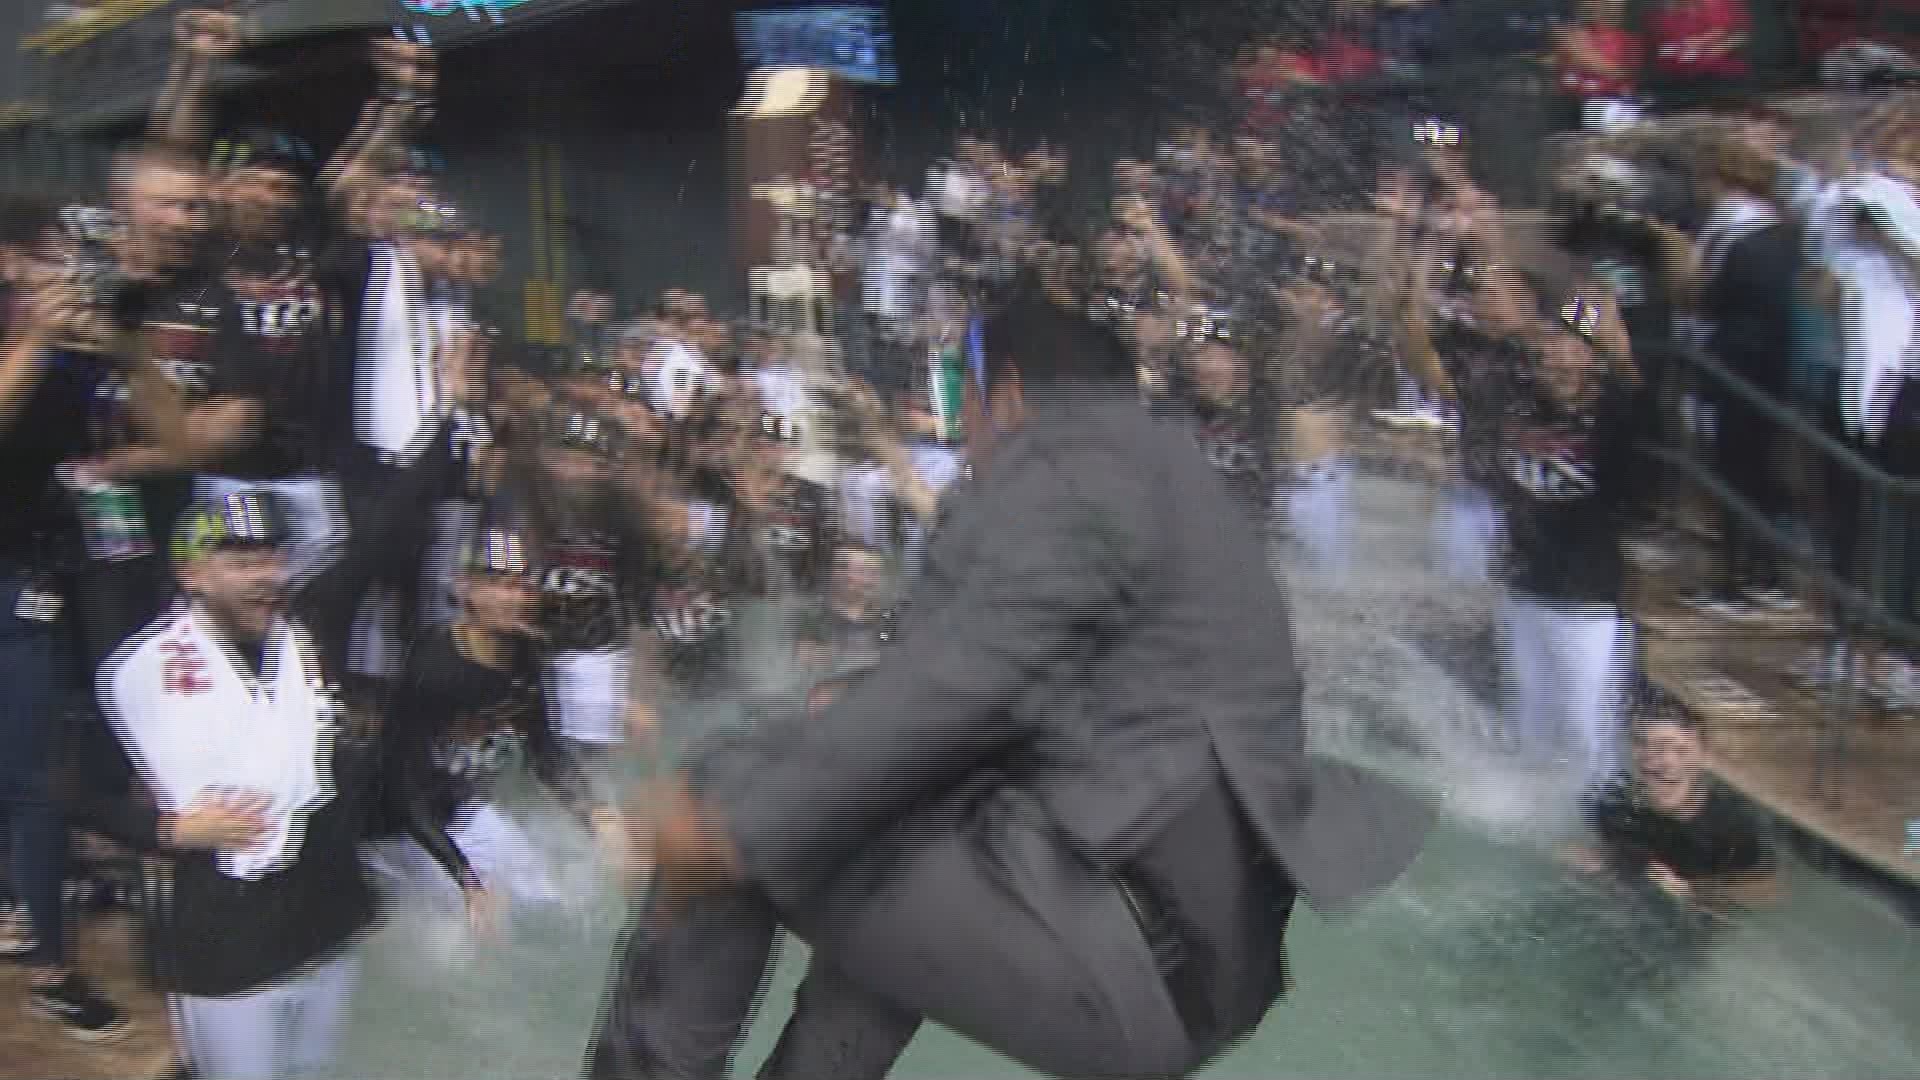 12News' Cameron Cox joined the D-backs NLDS sweep celebration by jumping into the Chase Field pool with the team